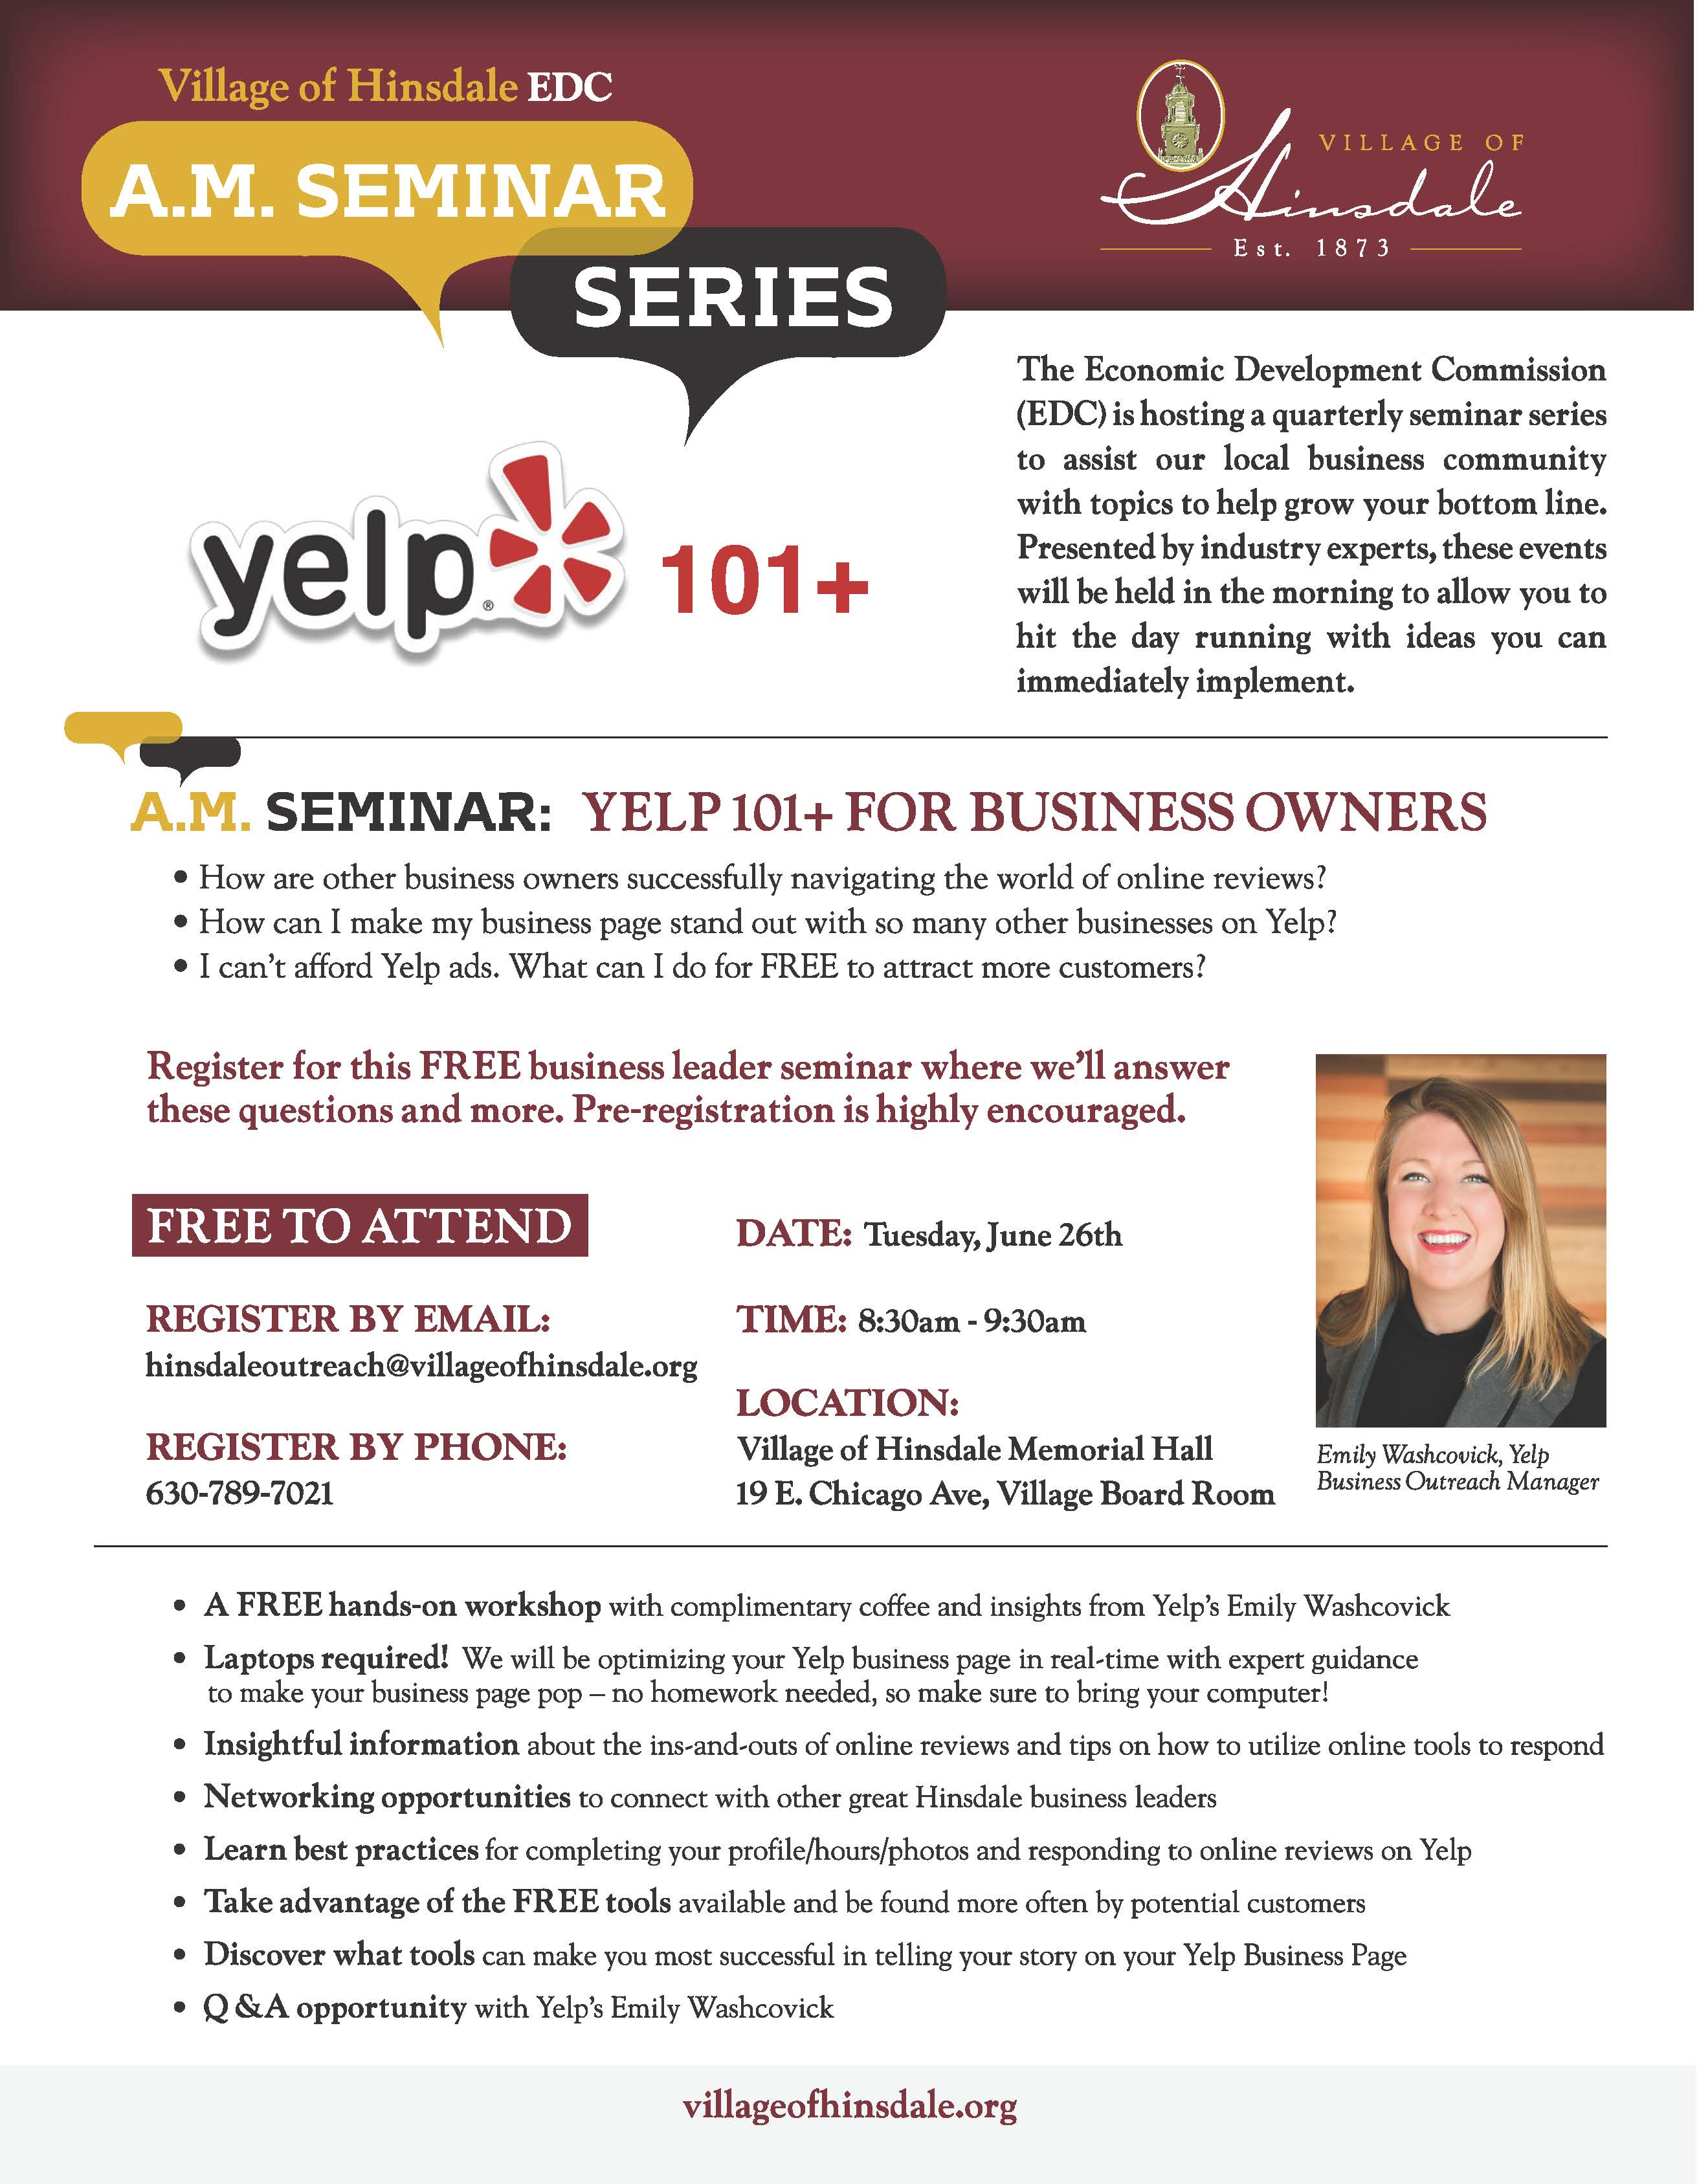 Hinsdale_Yelp101-Flyer